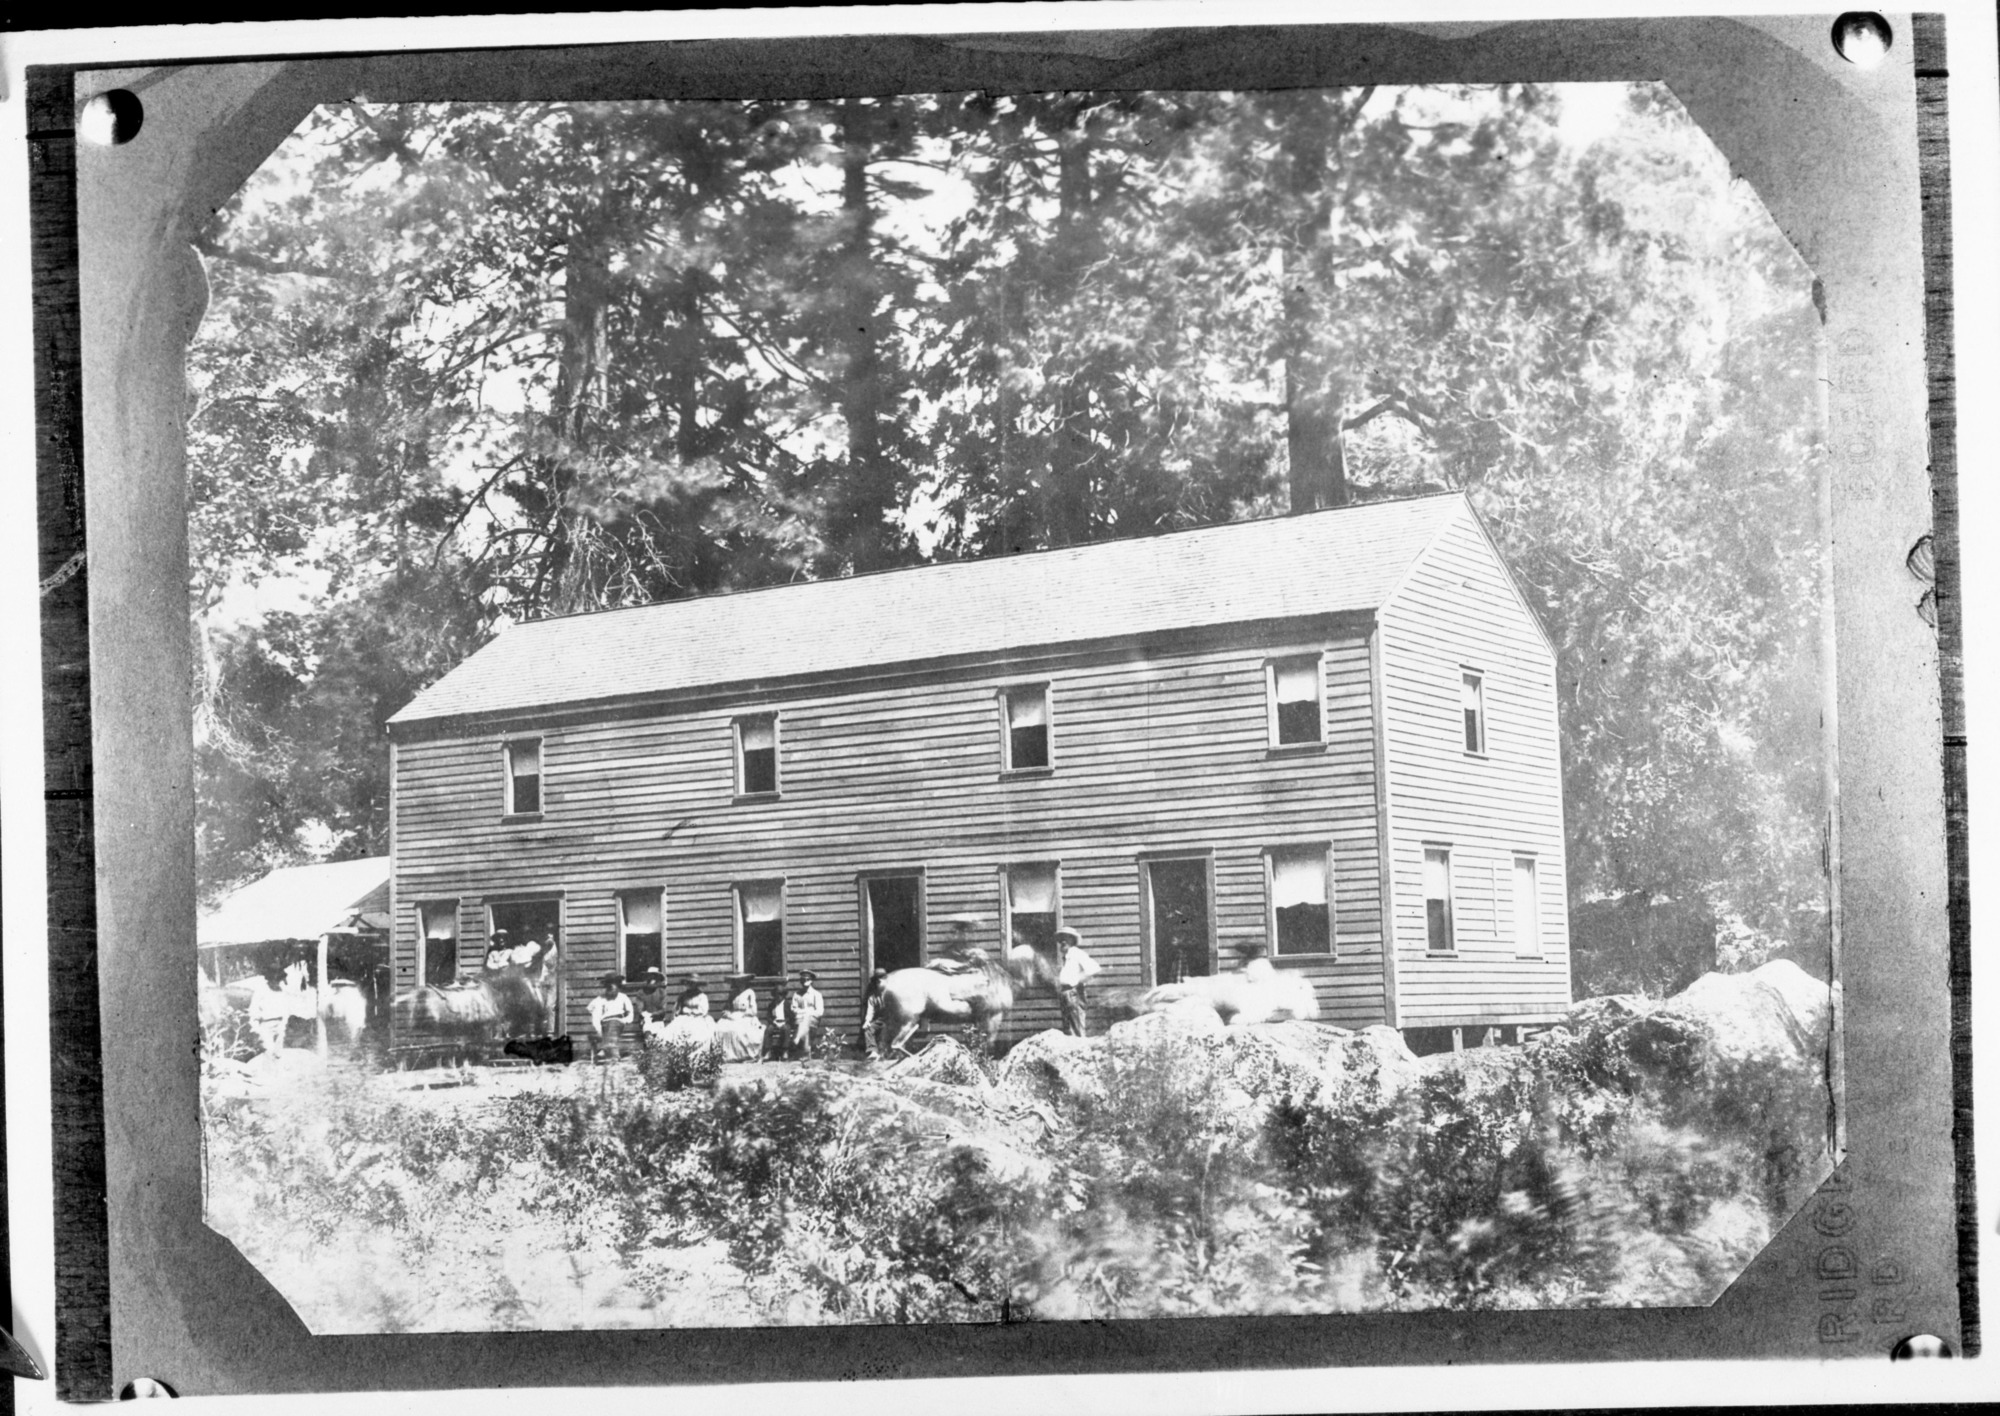 Upper House later conveted to Cedar Cottage. Photocopied by Cather from early photo made in Yosemite by C.L. Weed in 1859. See also RL-12,570 & 13,713. copied by Cather, copied May 22, 1941